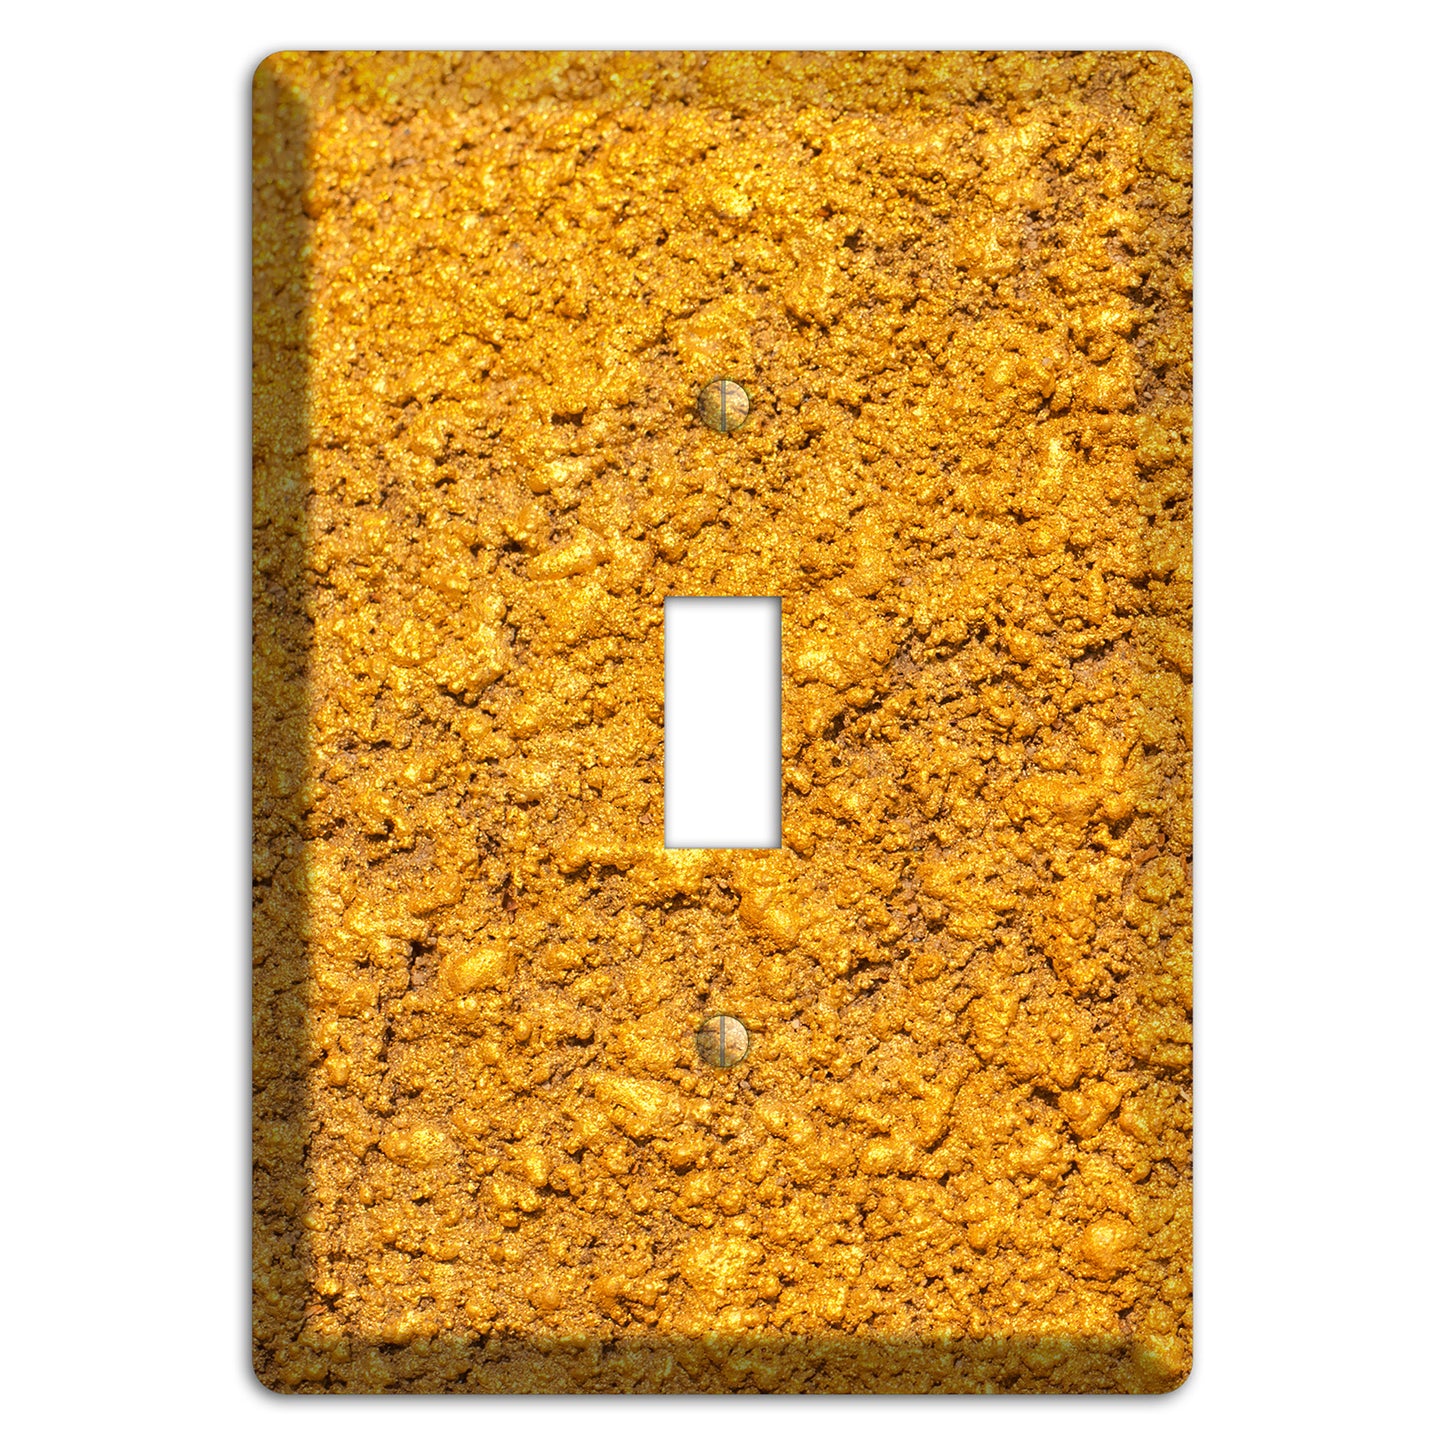 Yellow Textured Concrete Cover Plates